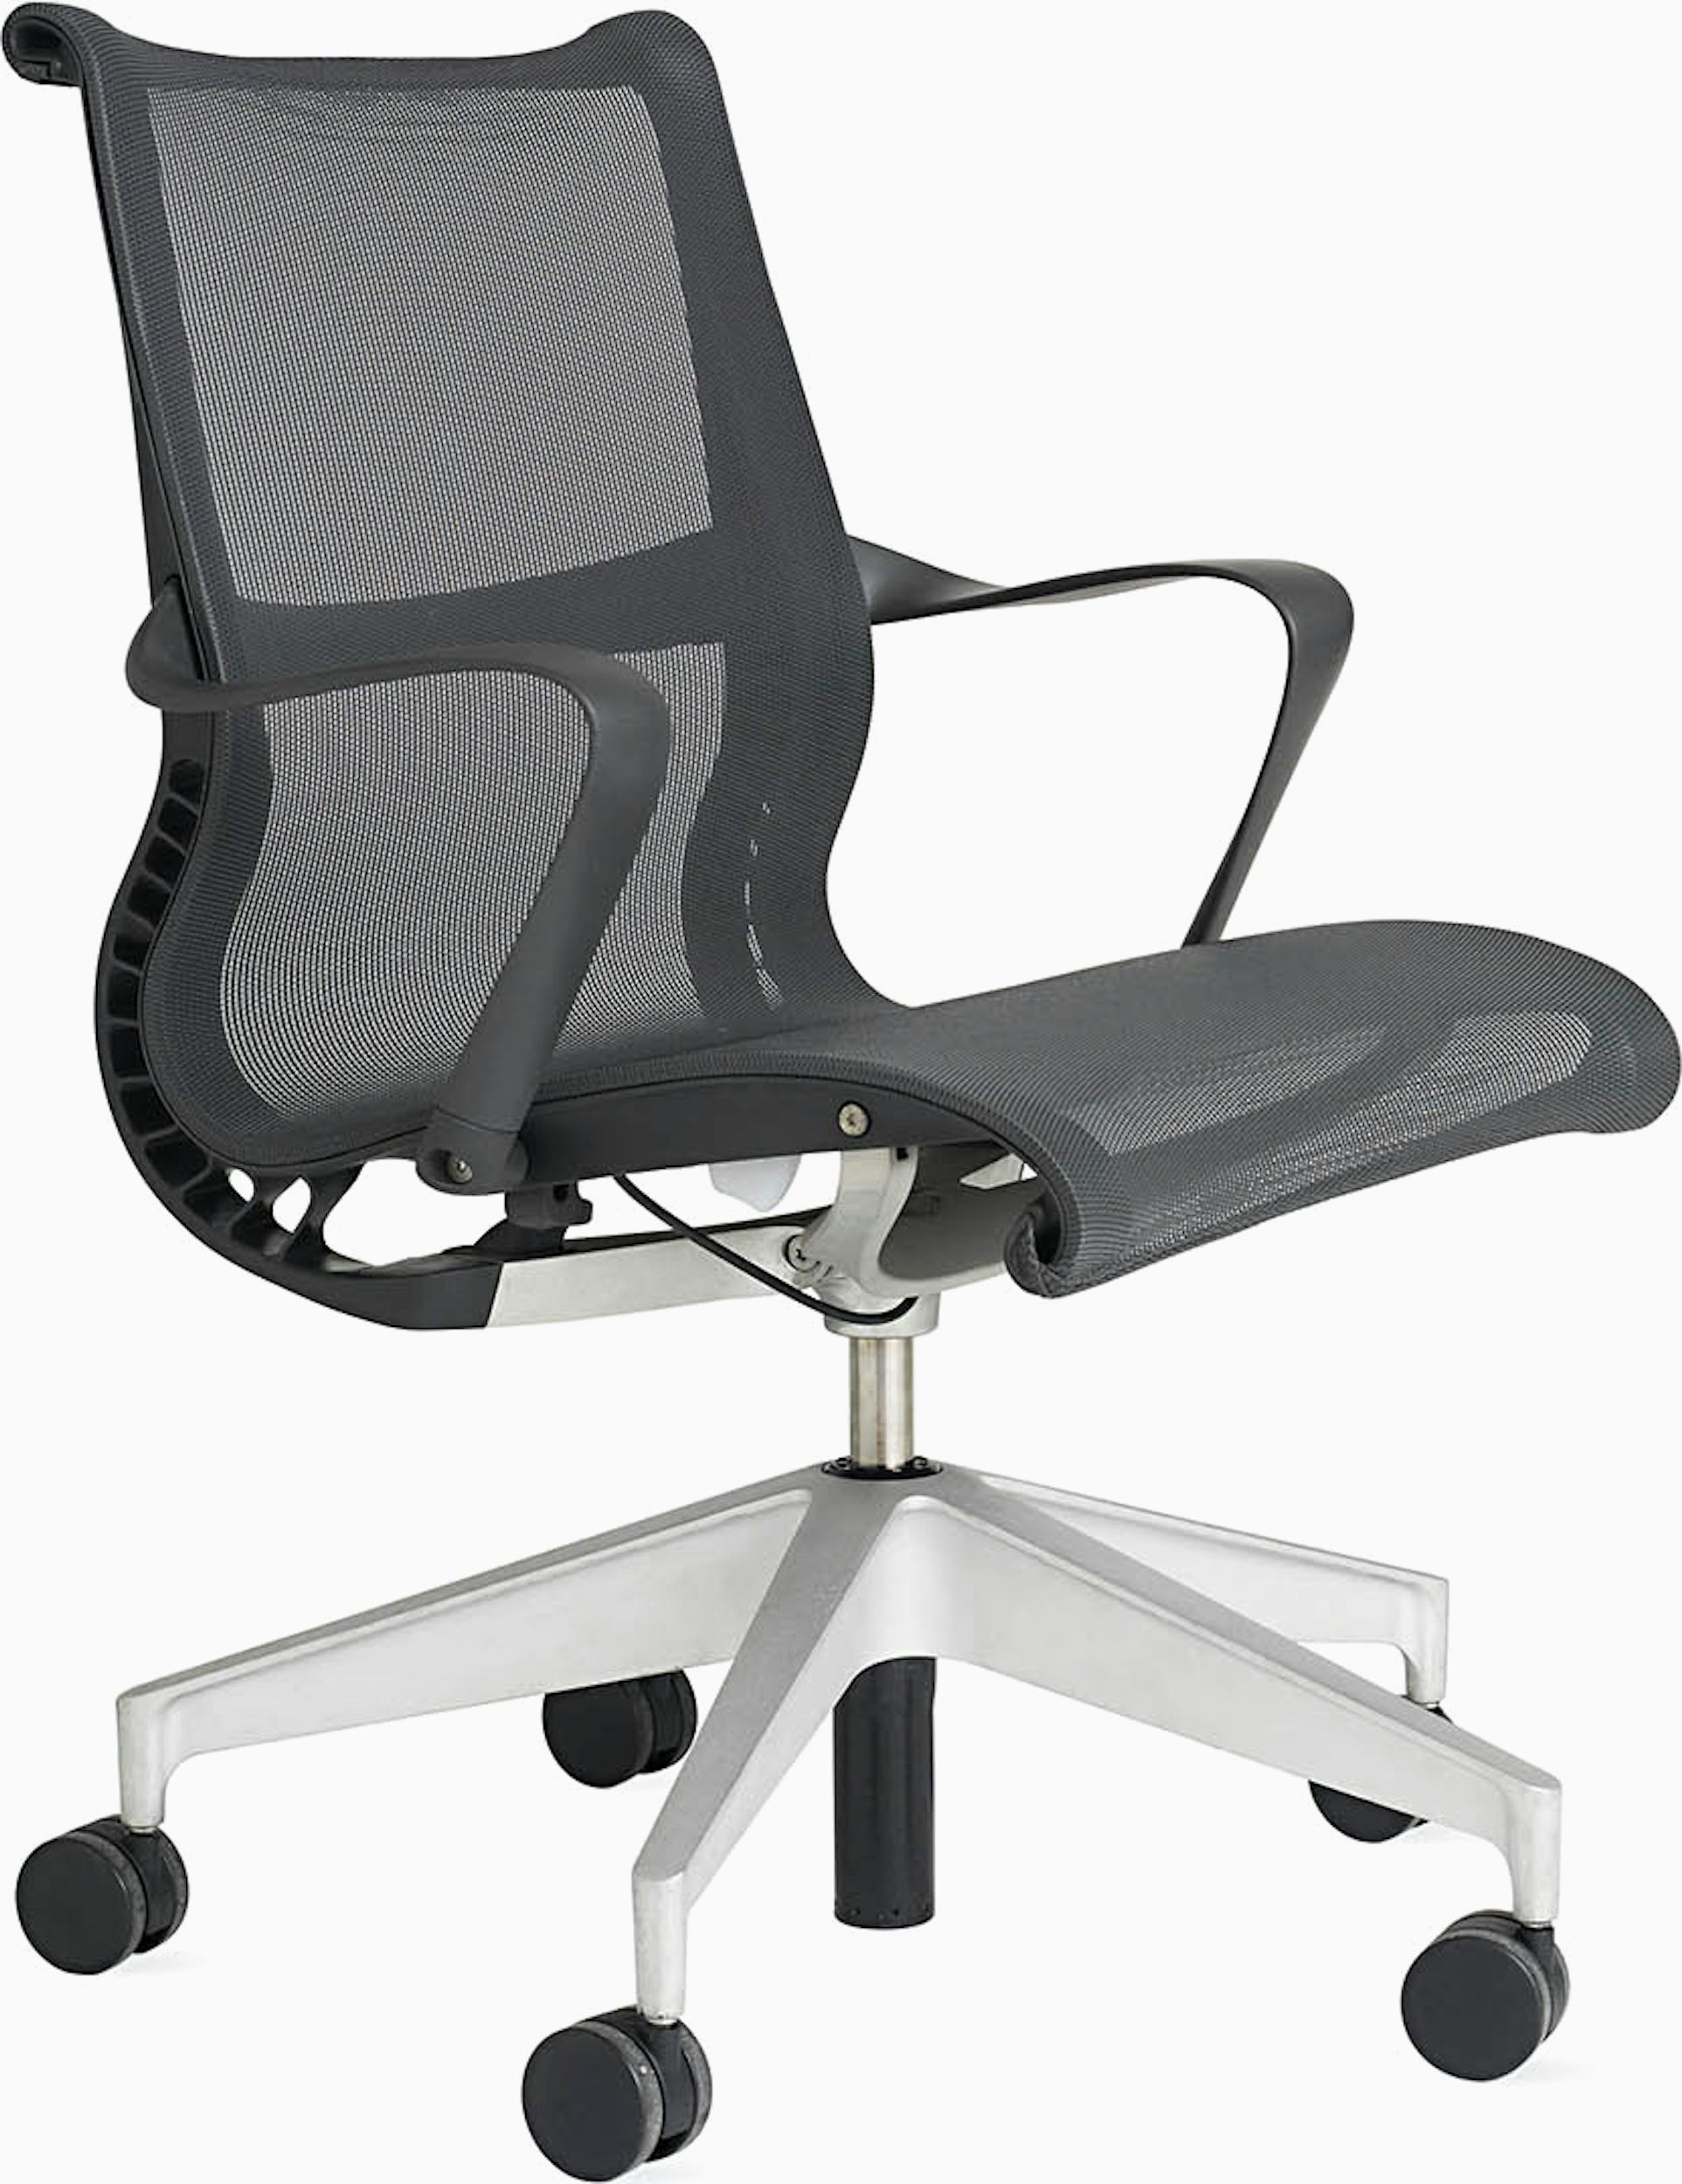 Corporate Office Furniture  At Corporate Office Furniture, we love to hear  from our customers. If you have any questions, comments or concerns, please  let us know and we will do our